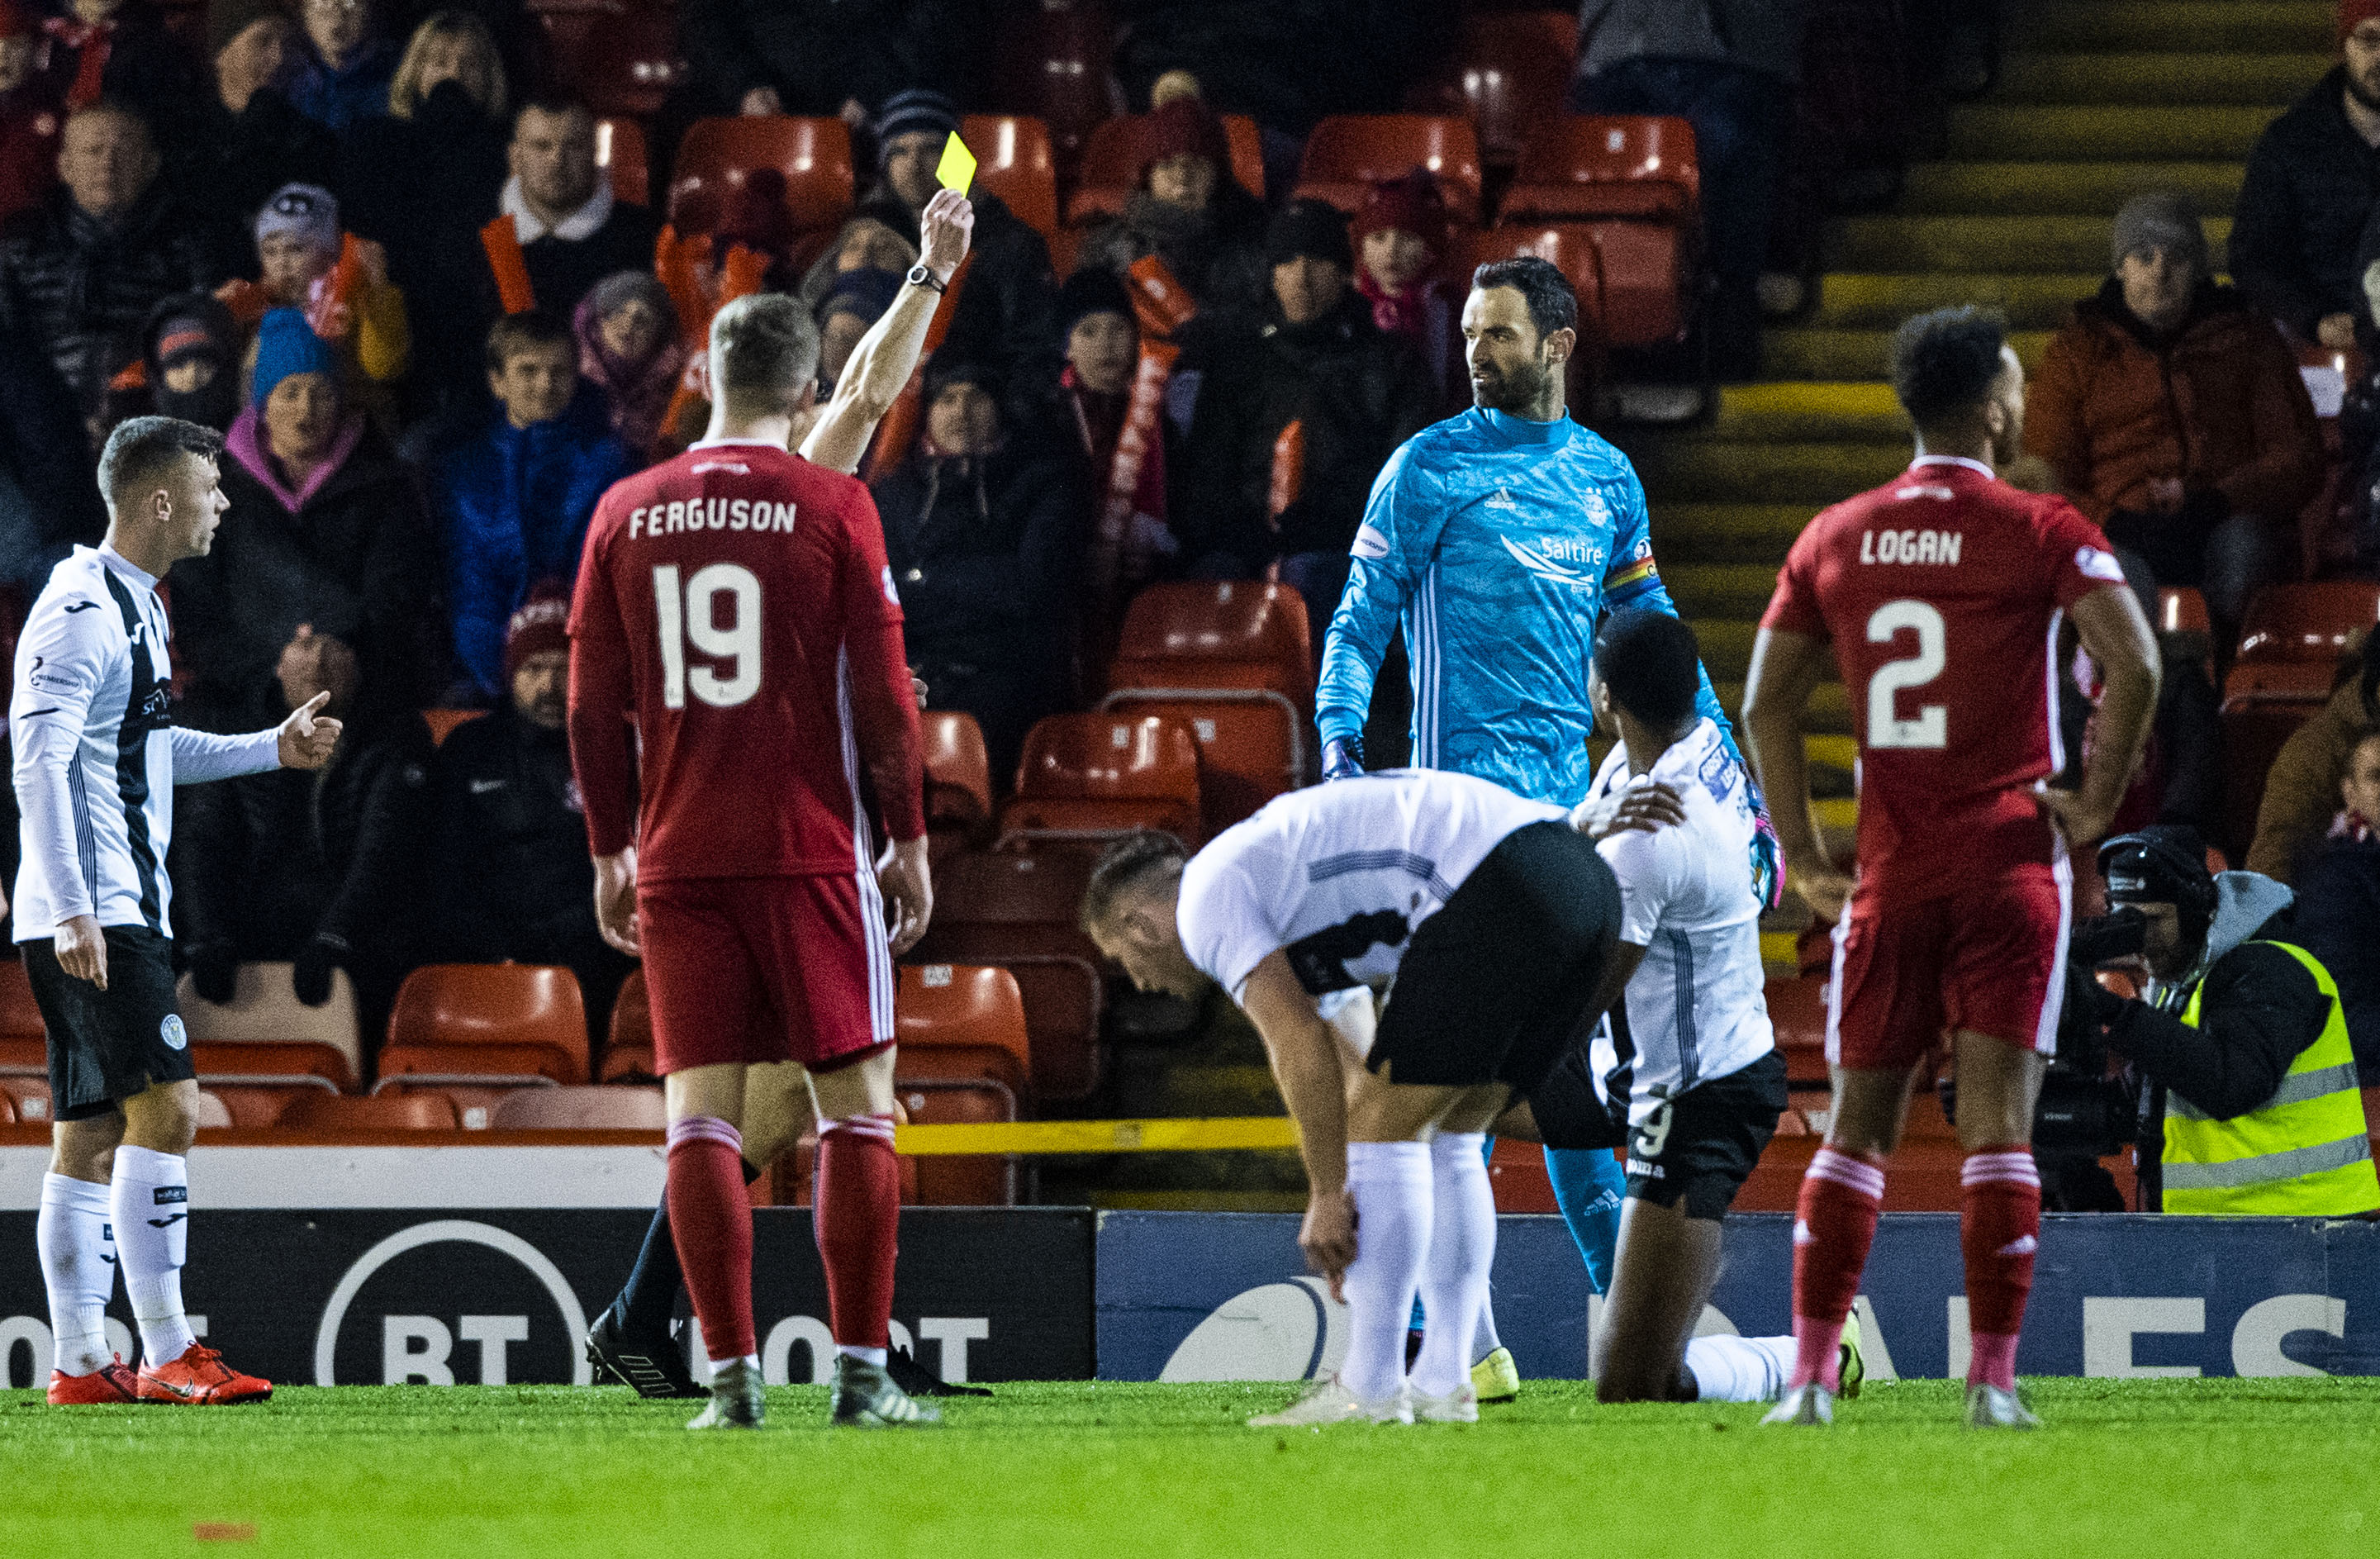 Aberdeen's Joe Lewis is booked by referee Steven McLean during the Ladbrokes Premiership match between Aberdeen and St Mirren at Pittodrie.